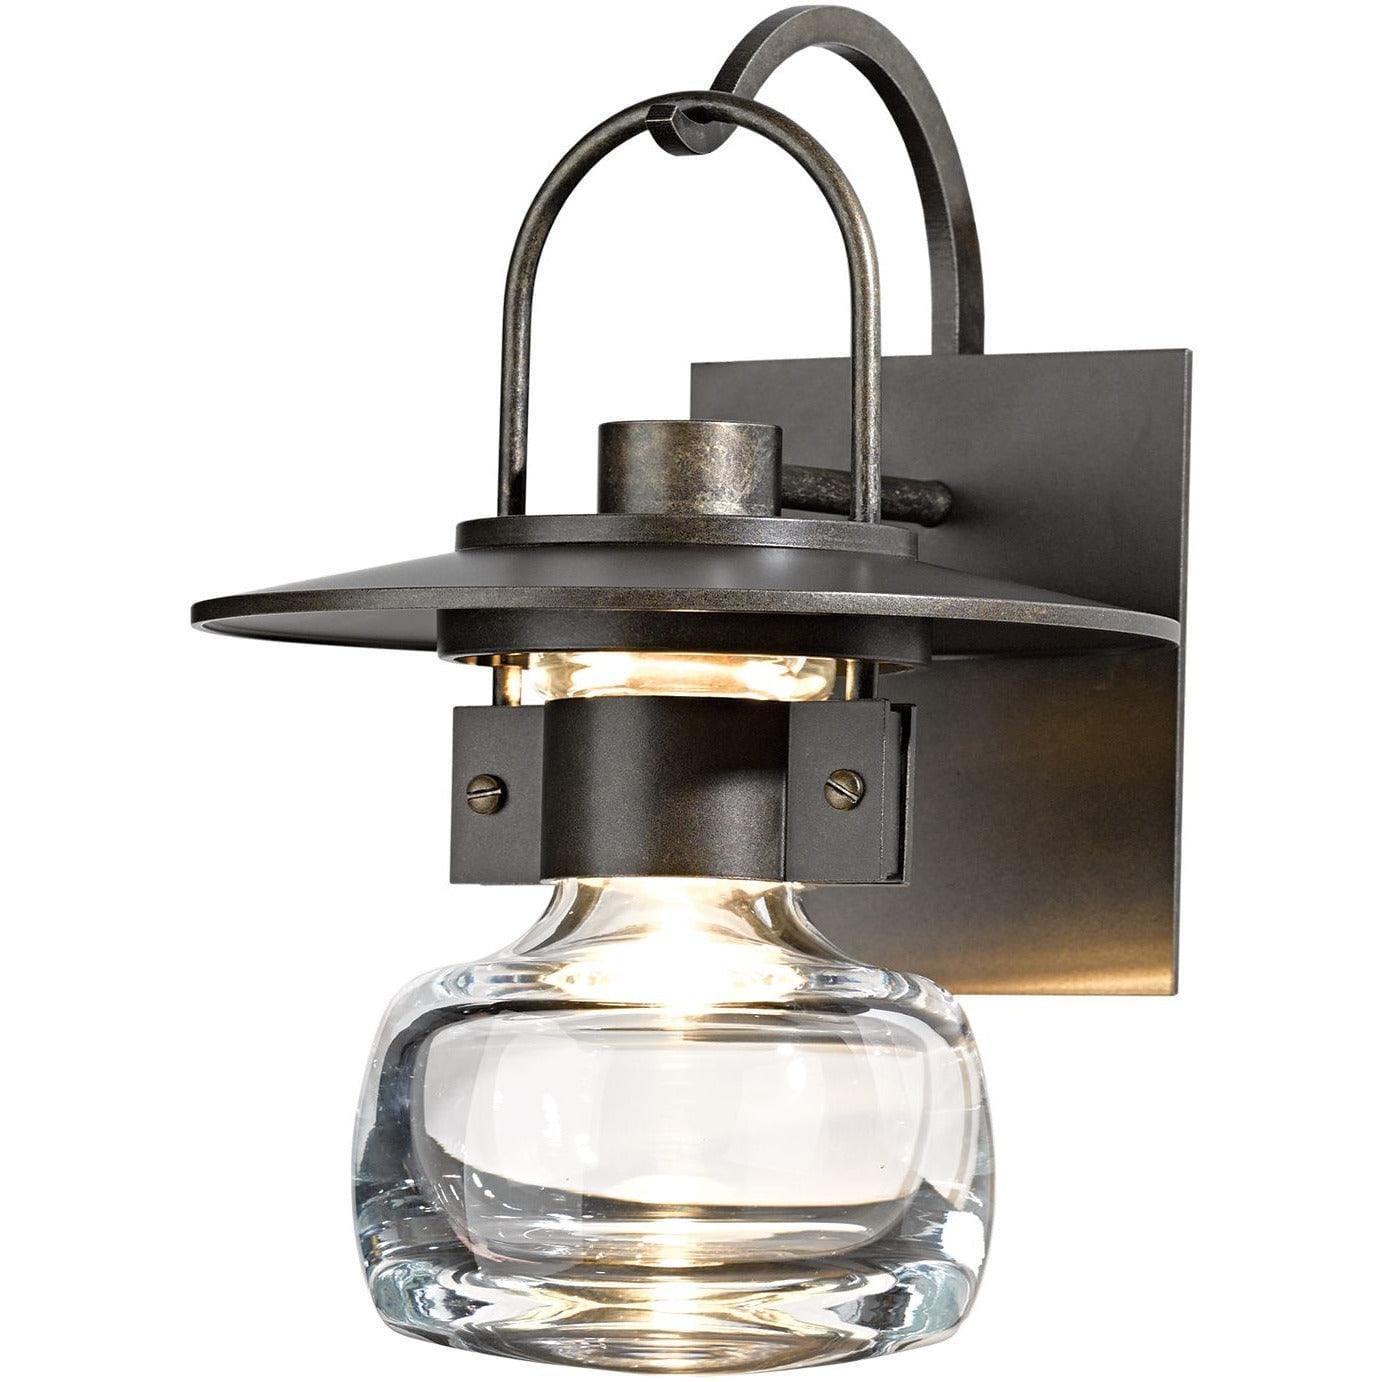 Hubbardton Forge - Mason 11-Inch One Light Outdoor Wall Sconce - 303003-SKT-75-ZM0448 | Montreal Lighting & Hardware